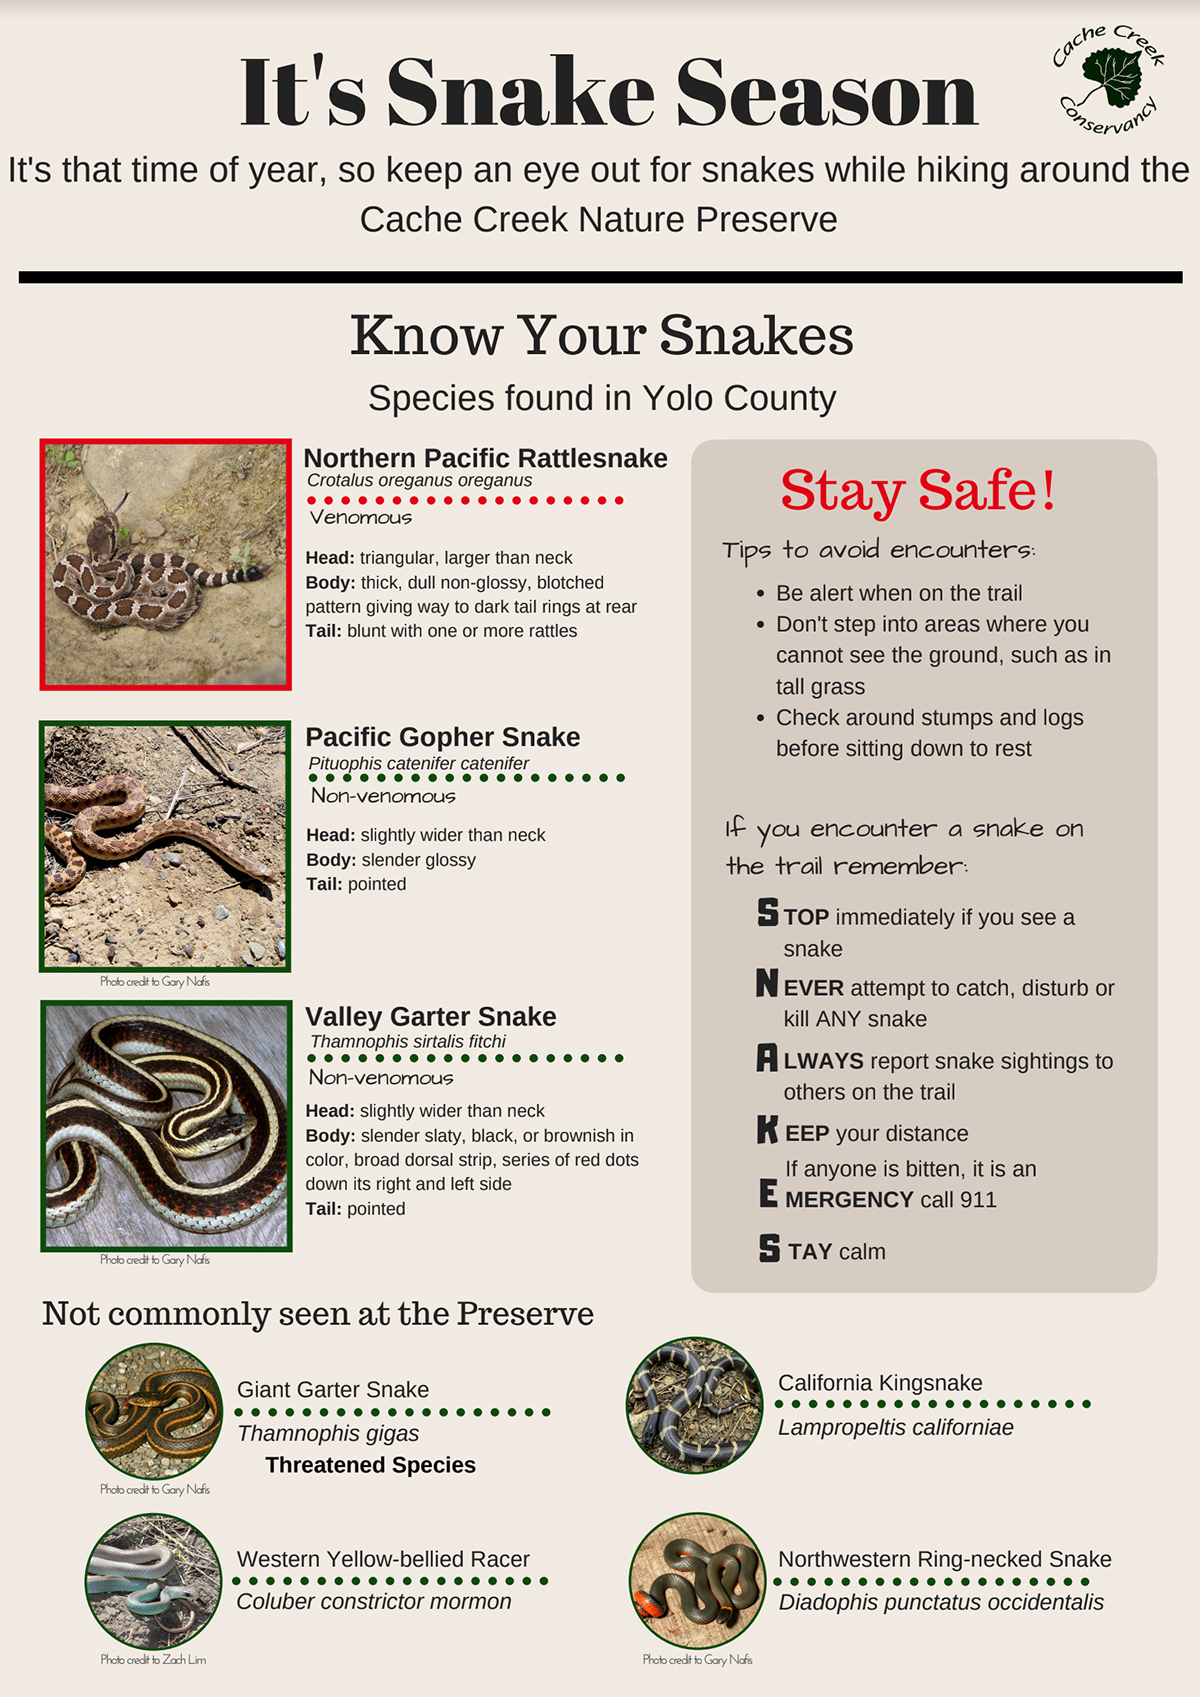 Know Your Snakes poster describing species found in Yolo County